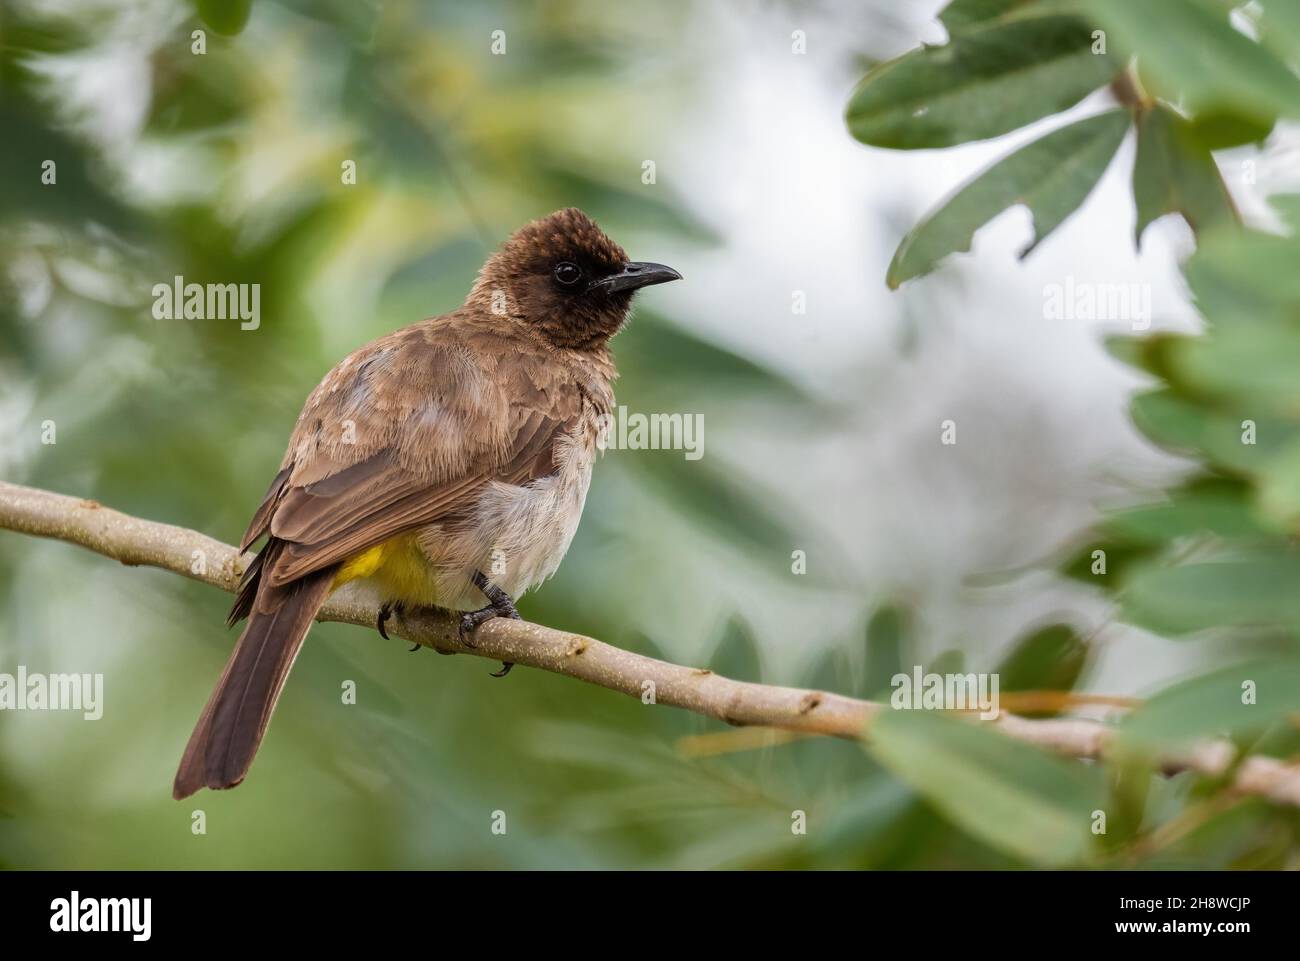 Dark-capped Bulbul - Pycnonotus tricolor, beautiful common perching bird from African gardens and woodlands, Entebbe, Uganda. Stock Photo